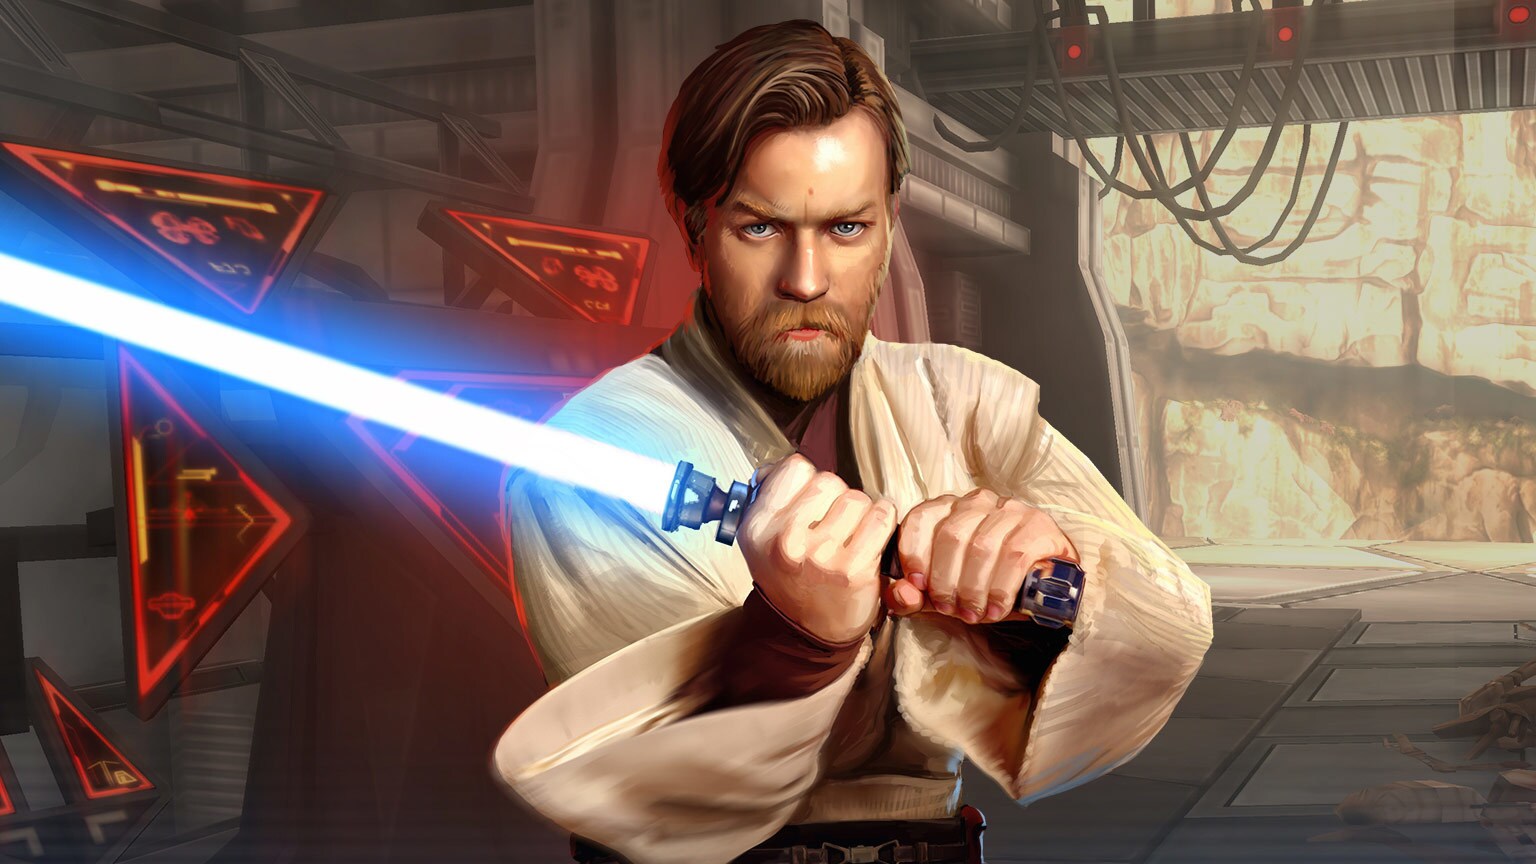 Hello There! Revenge of the Sith-Era Obi-Wan Kenobi Comes to Star Wars: Galaxy of Heroes - Exclusive